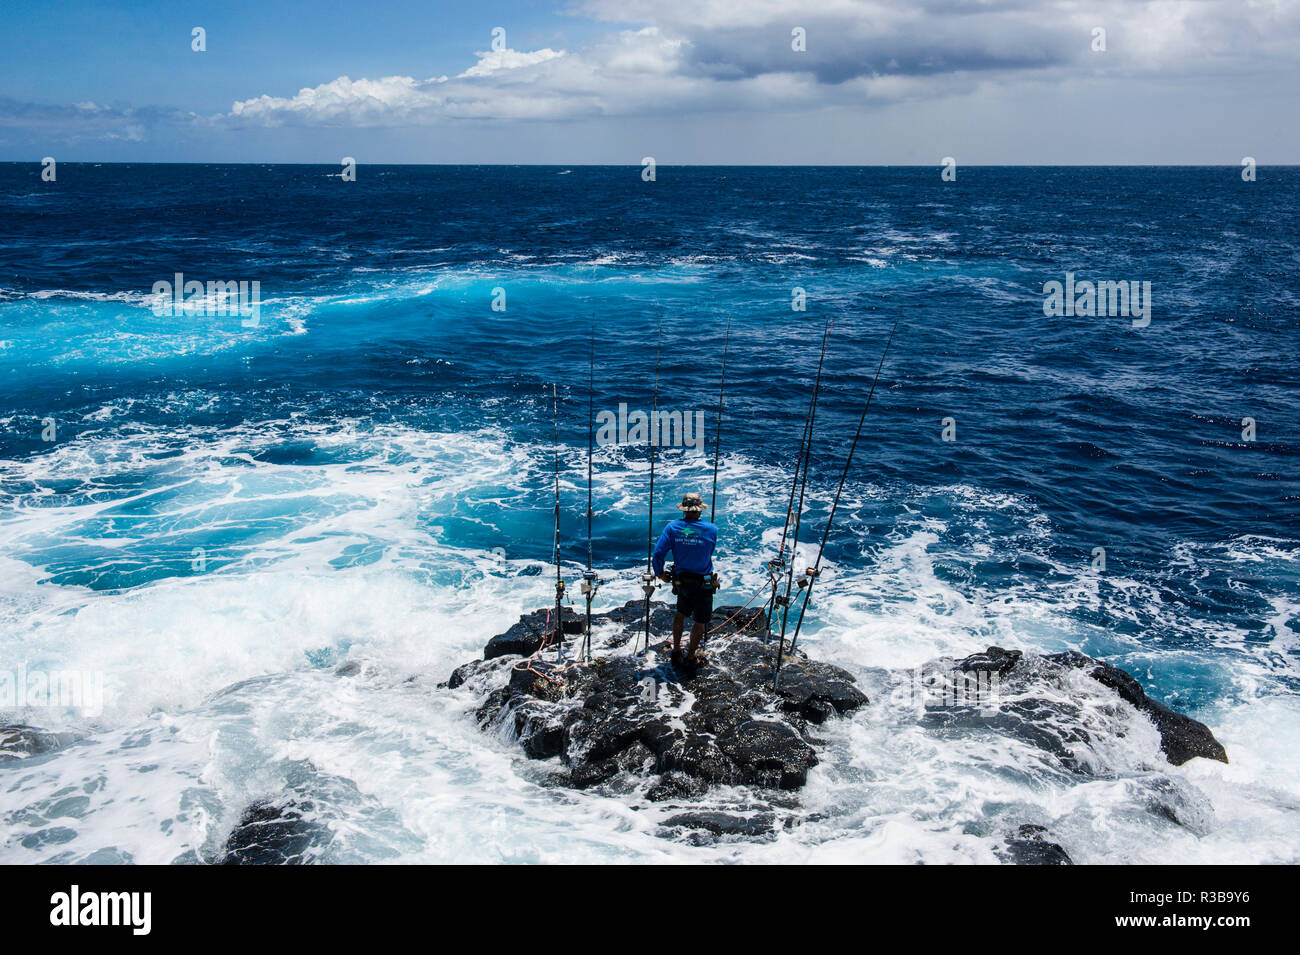 Fisherman standing on a rock in The Sea with his angling rods, Kalae, South Point, Big Island, Hawaii, USA Stock Photo